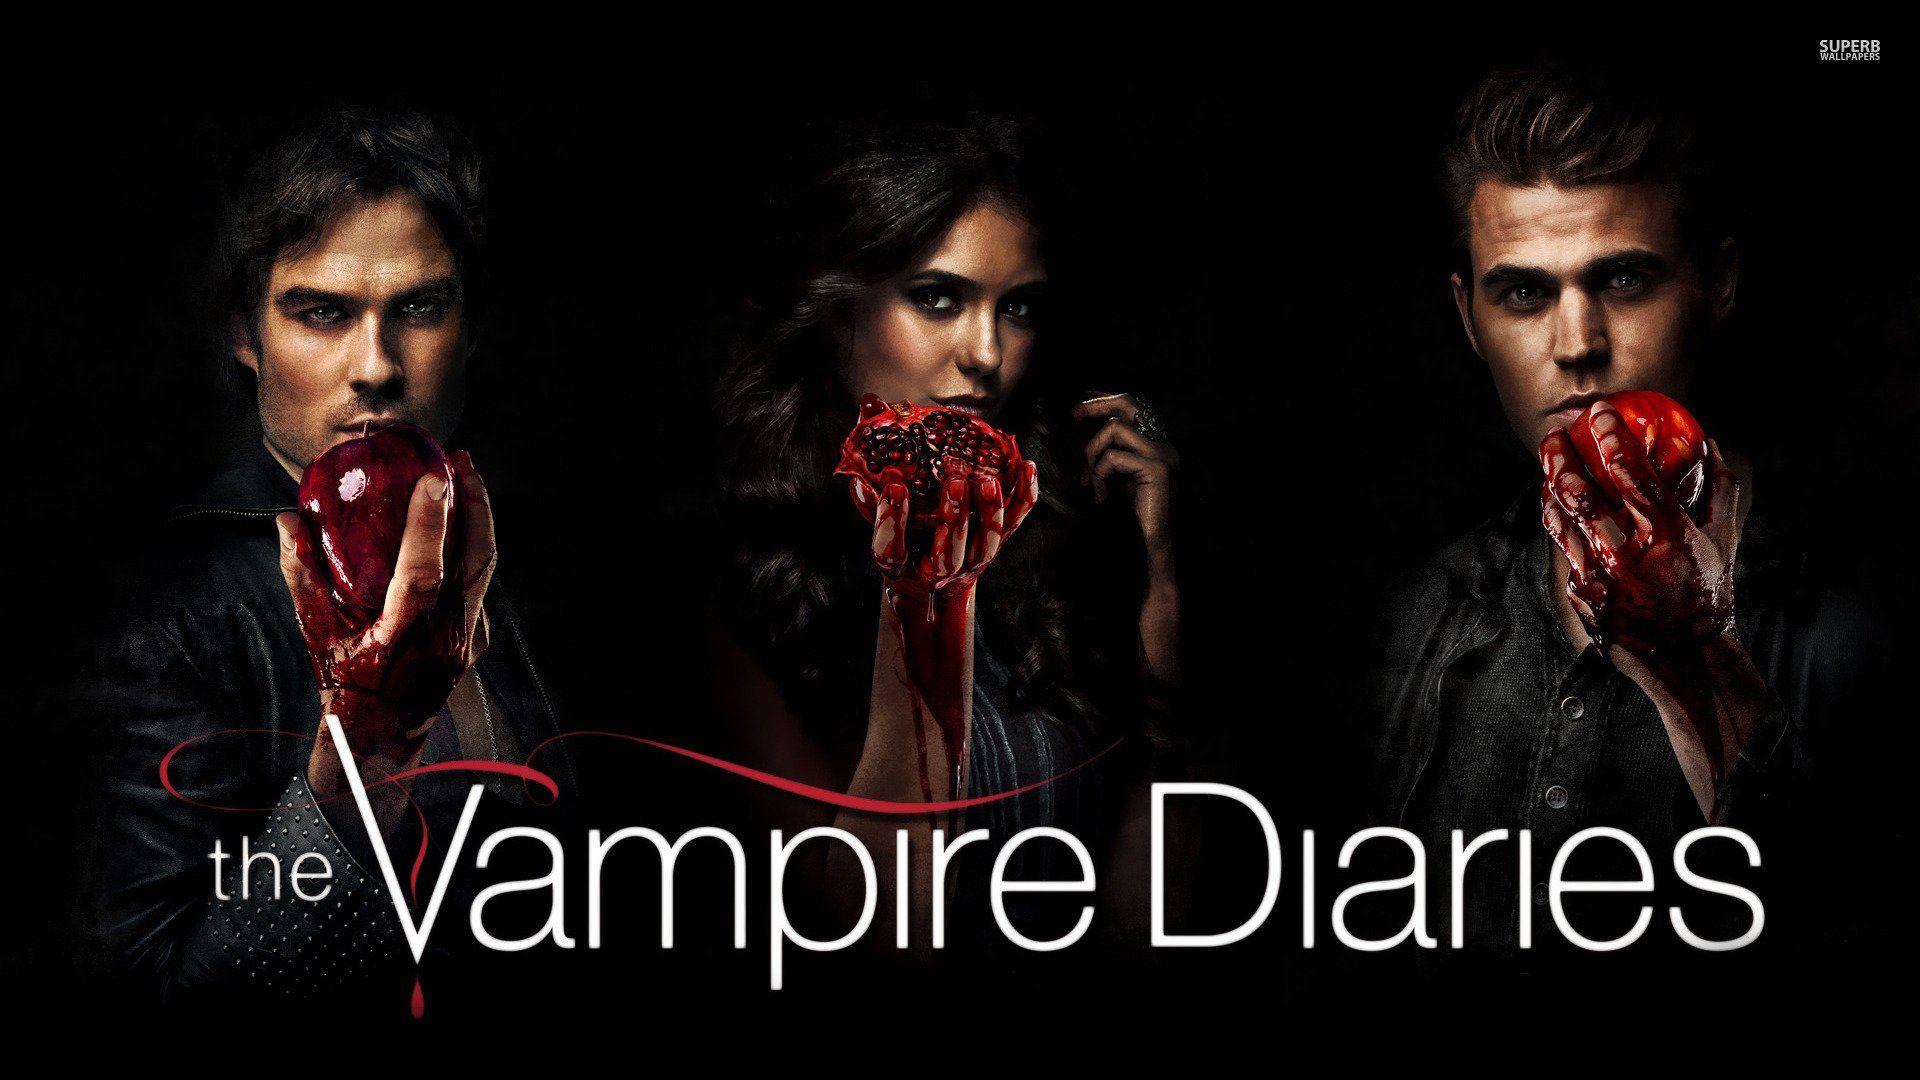 Stefan And Damon Salvatore Wallpaper, Image Collection of Stefan